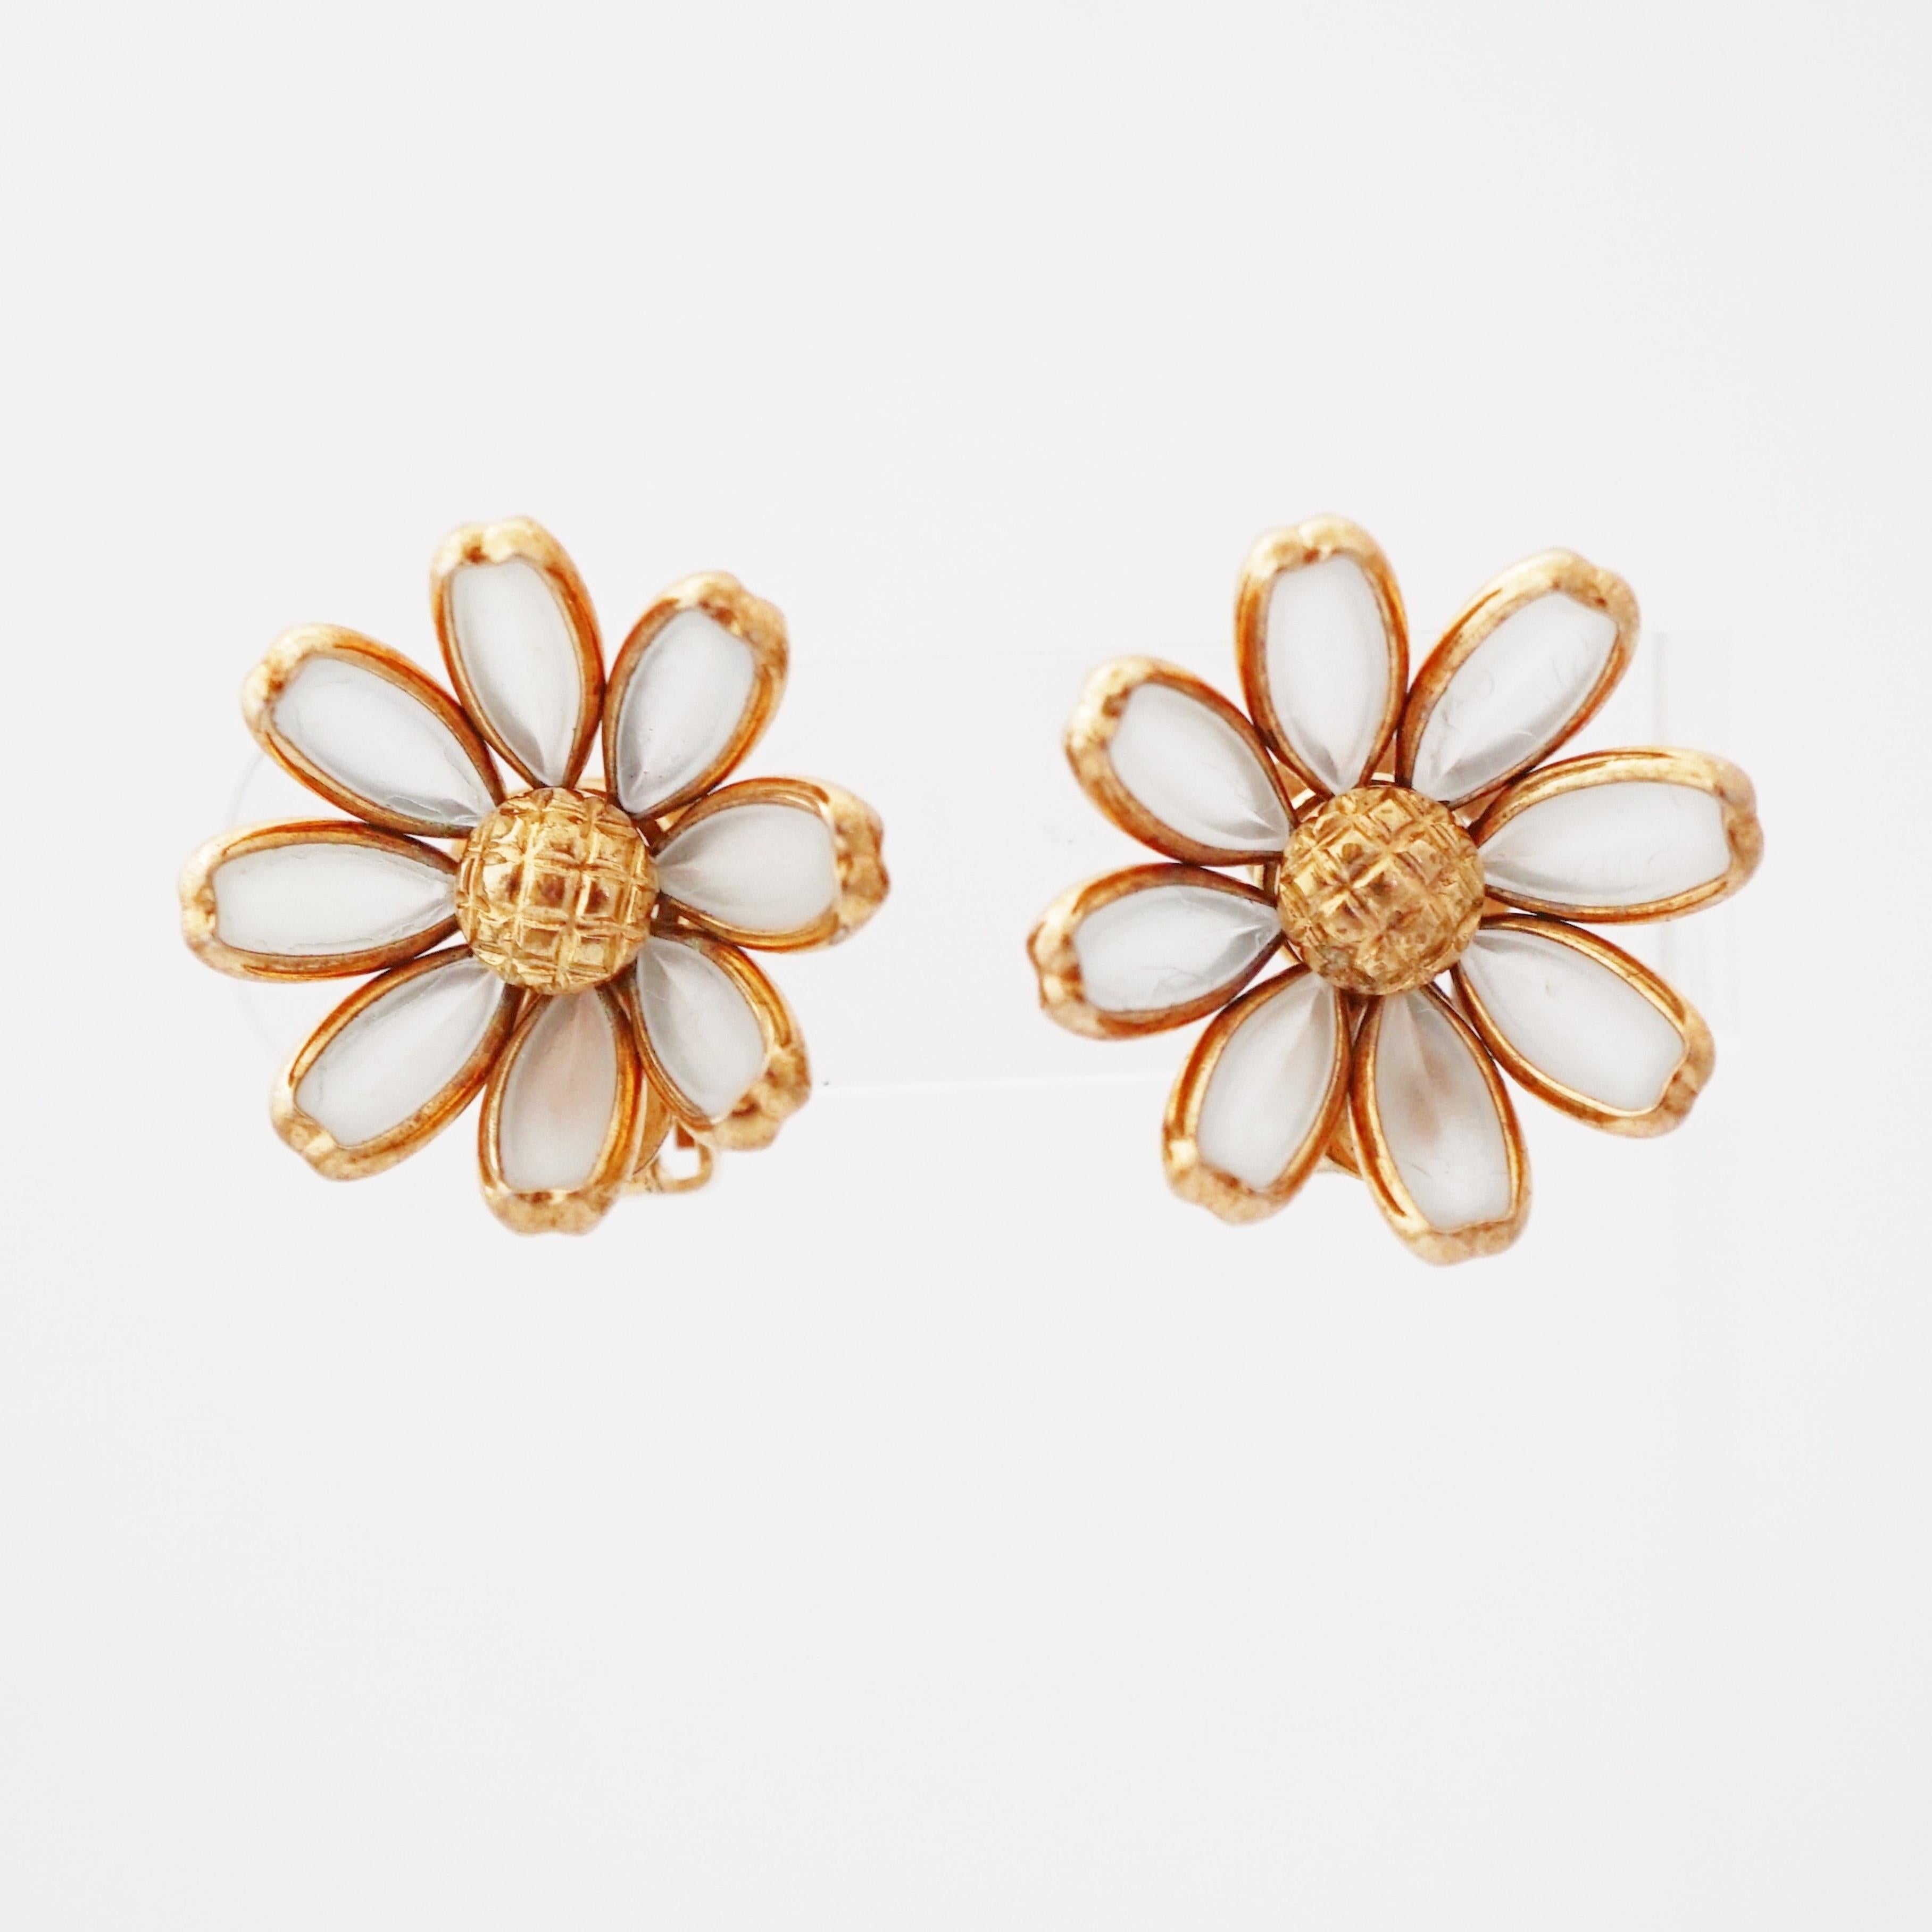 Modern Daisy Flower Poured Frosted Glass Dimensional Earrings By Crown Trifari, 1950s For Sale